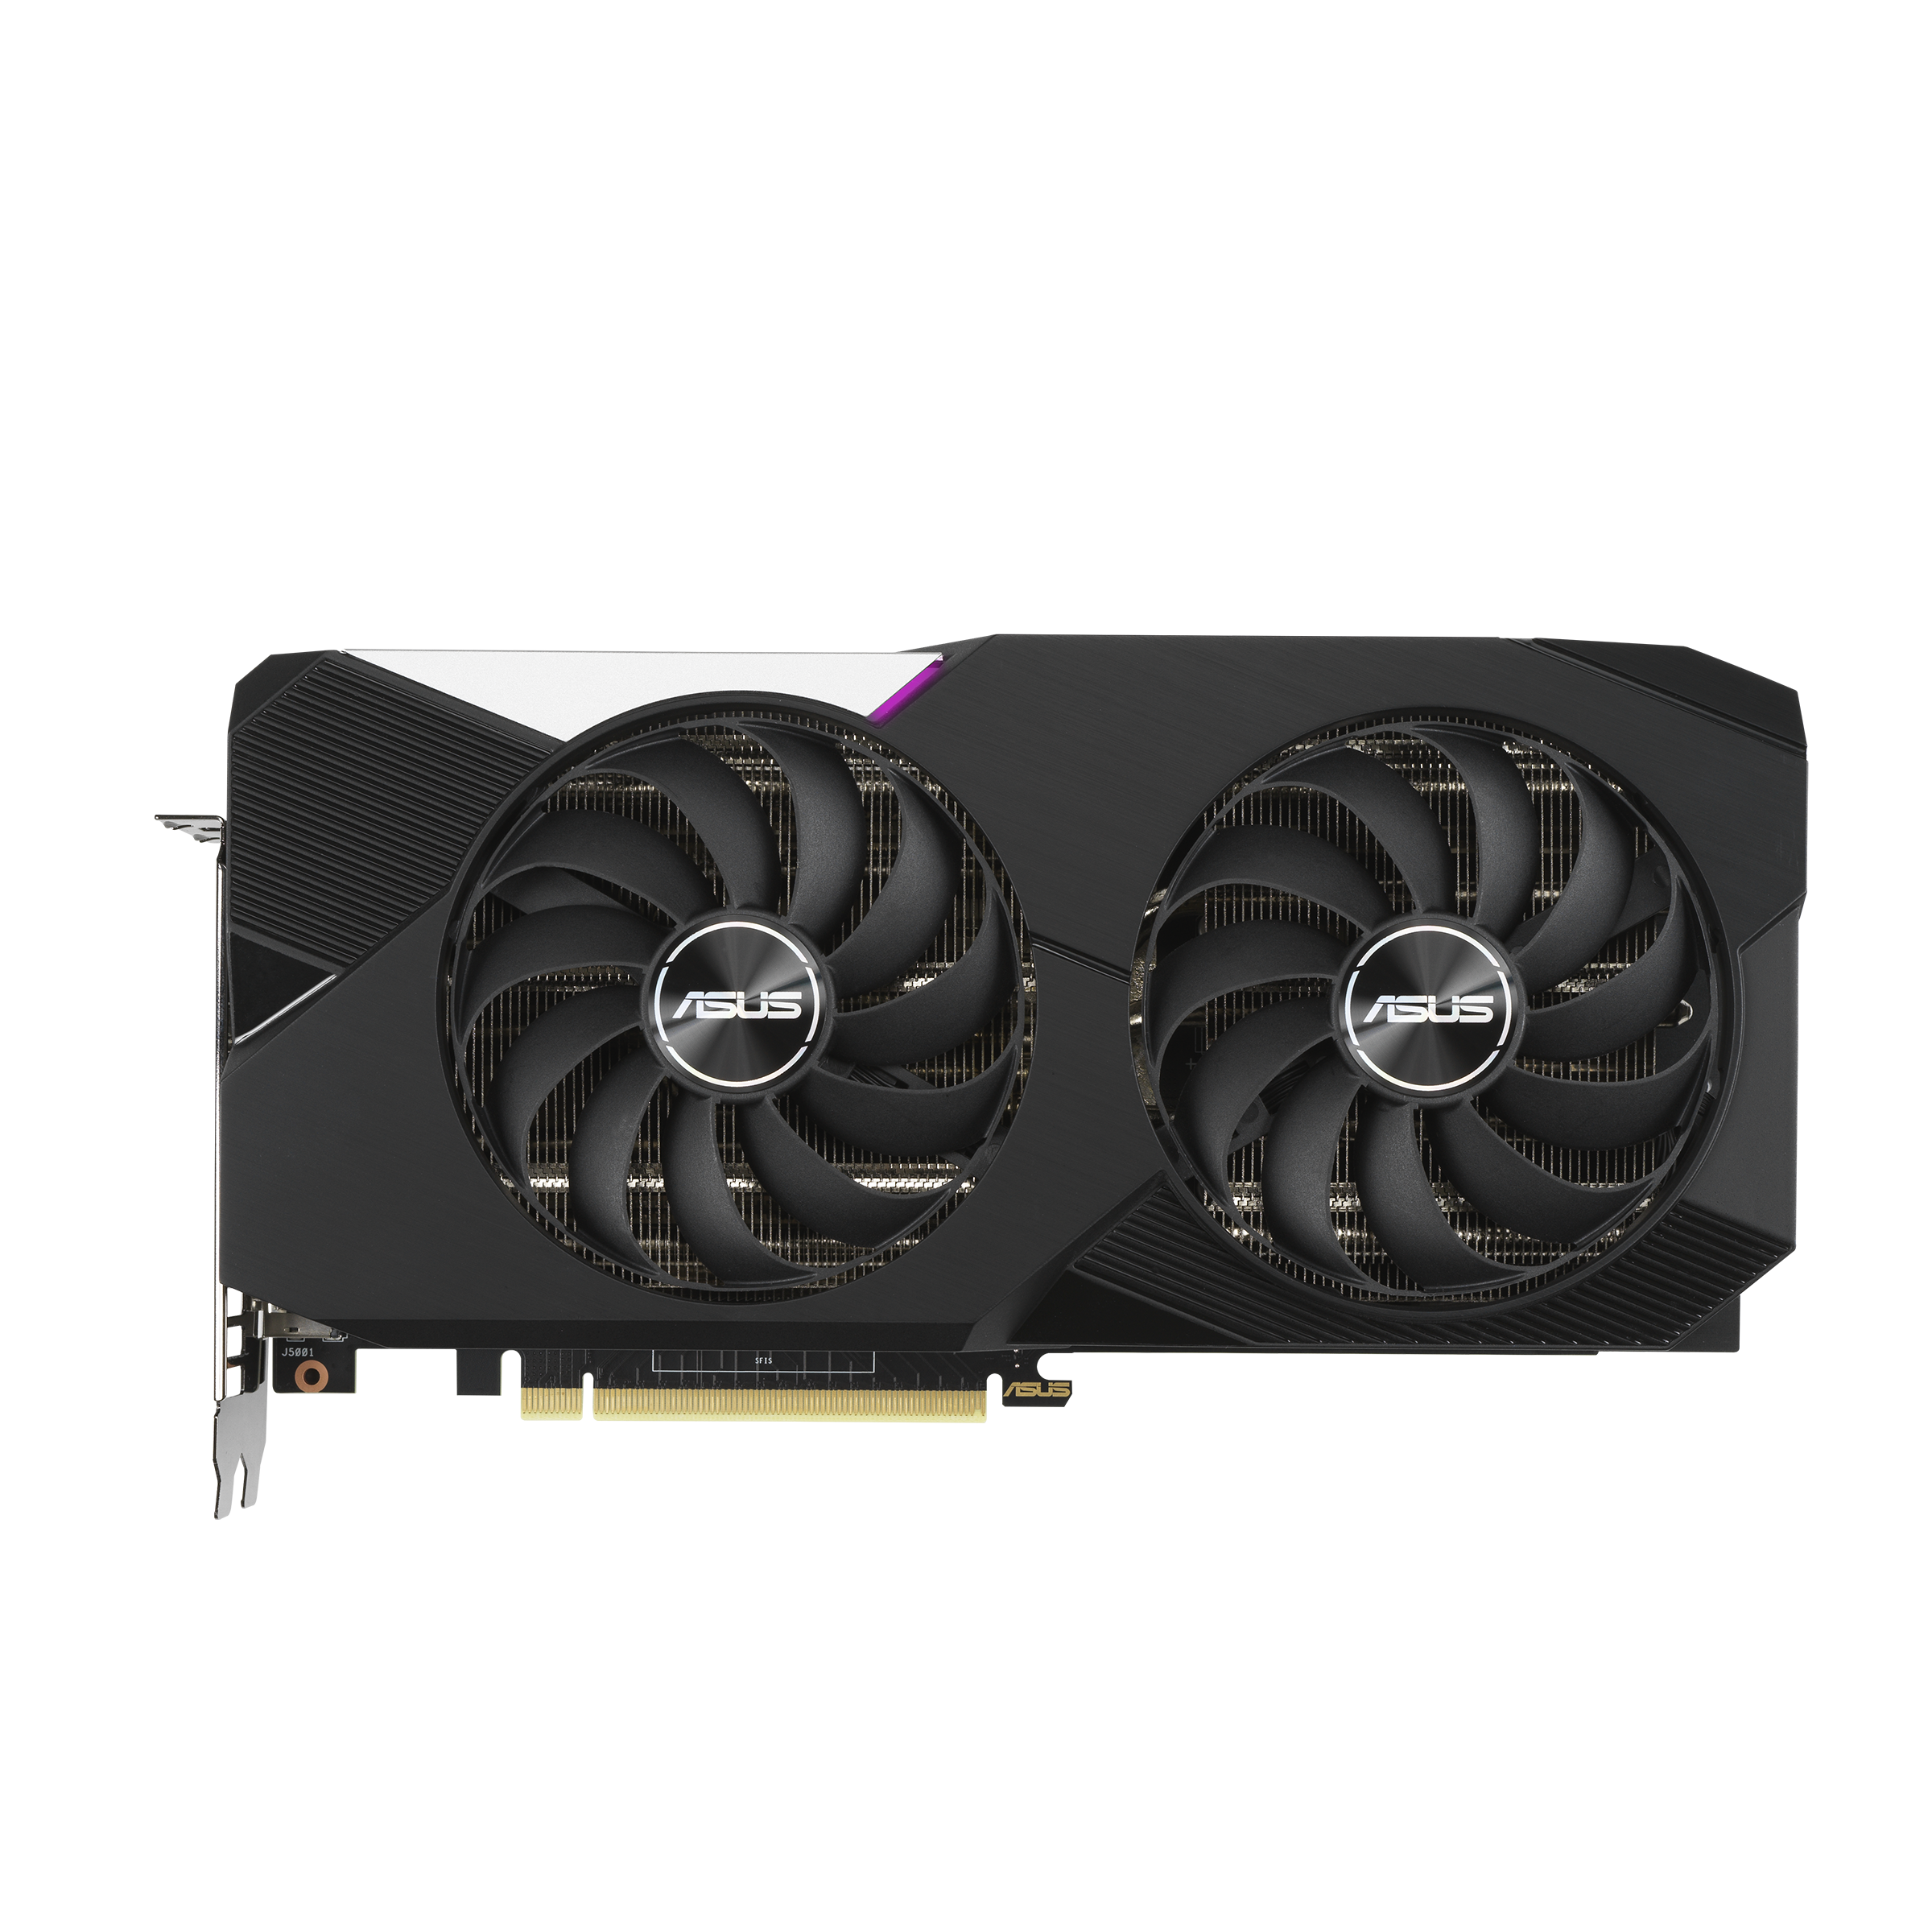 DUAL-RTX3070-O8G｜Graphics Cards｜ASUS Canada